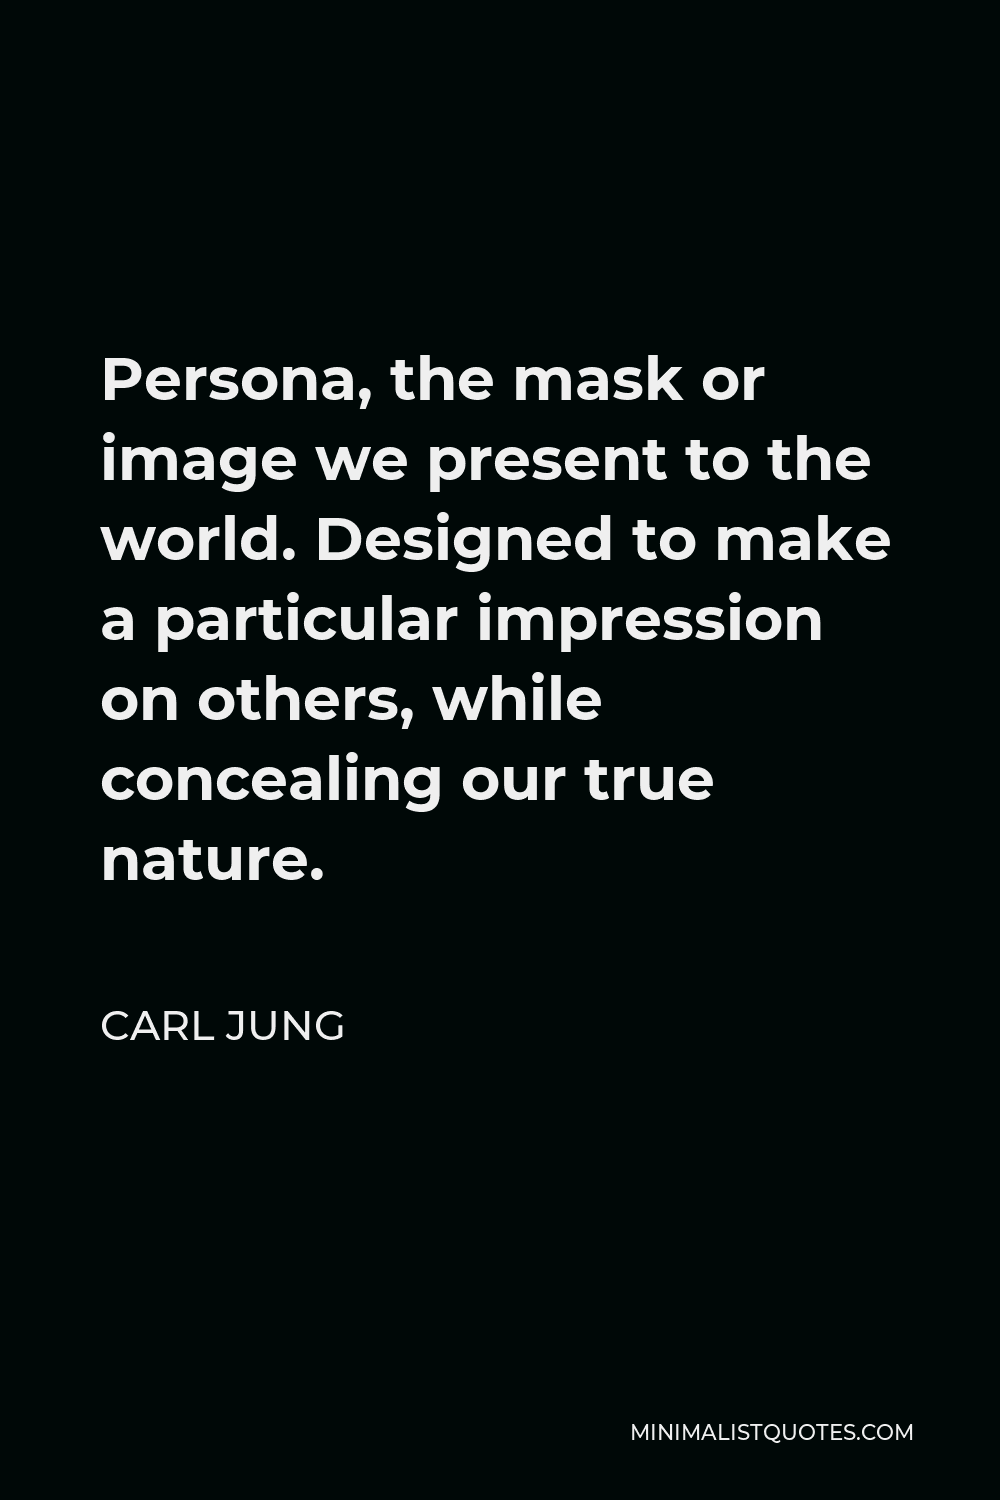 Carl Jung Quote Persona The Mask Or Image We Present To The World Designed To Make A Particular Impression On Others While Concealing Our True Nature